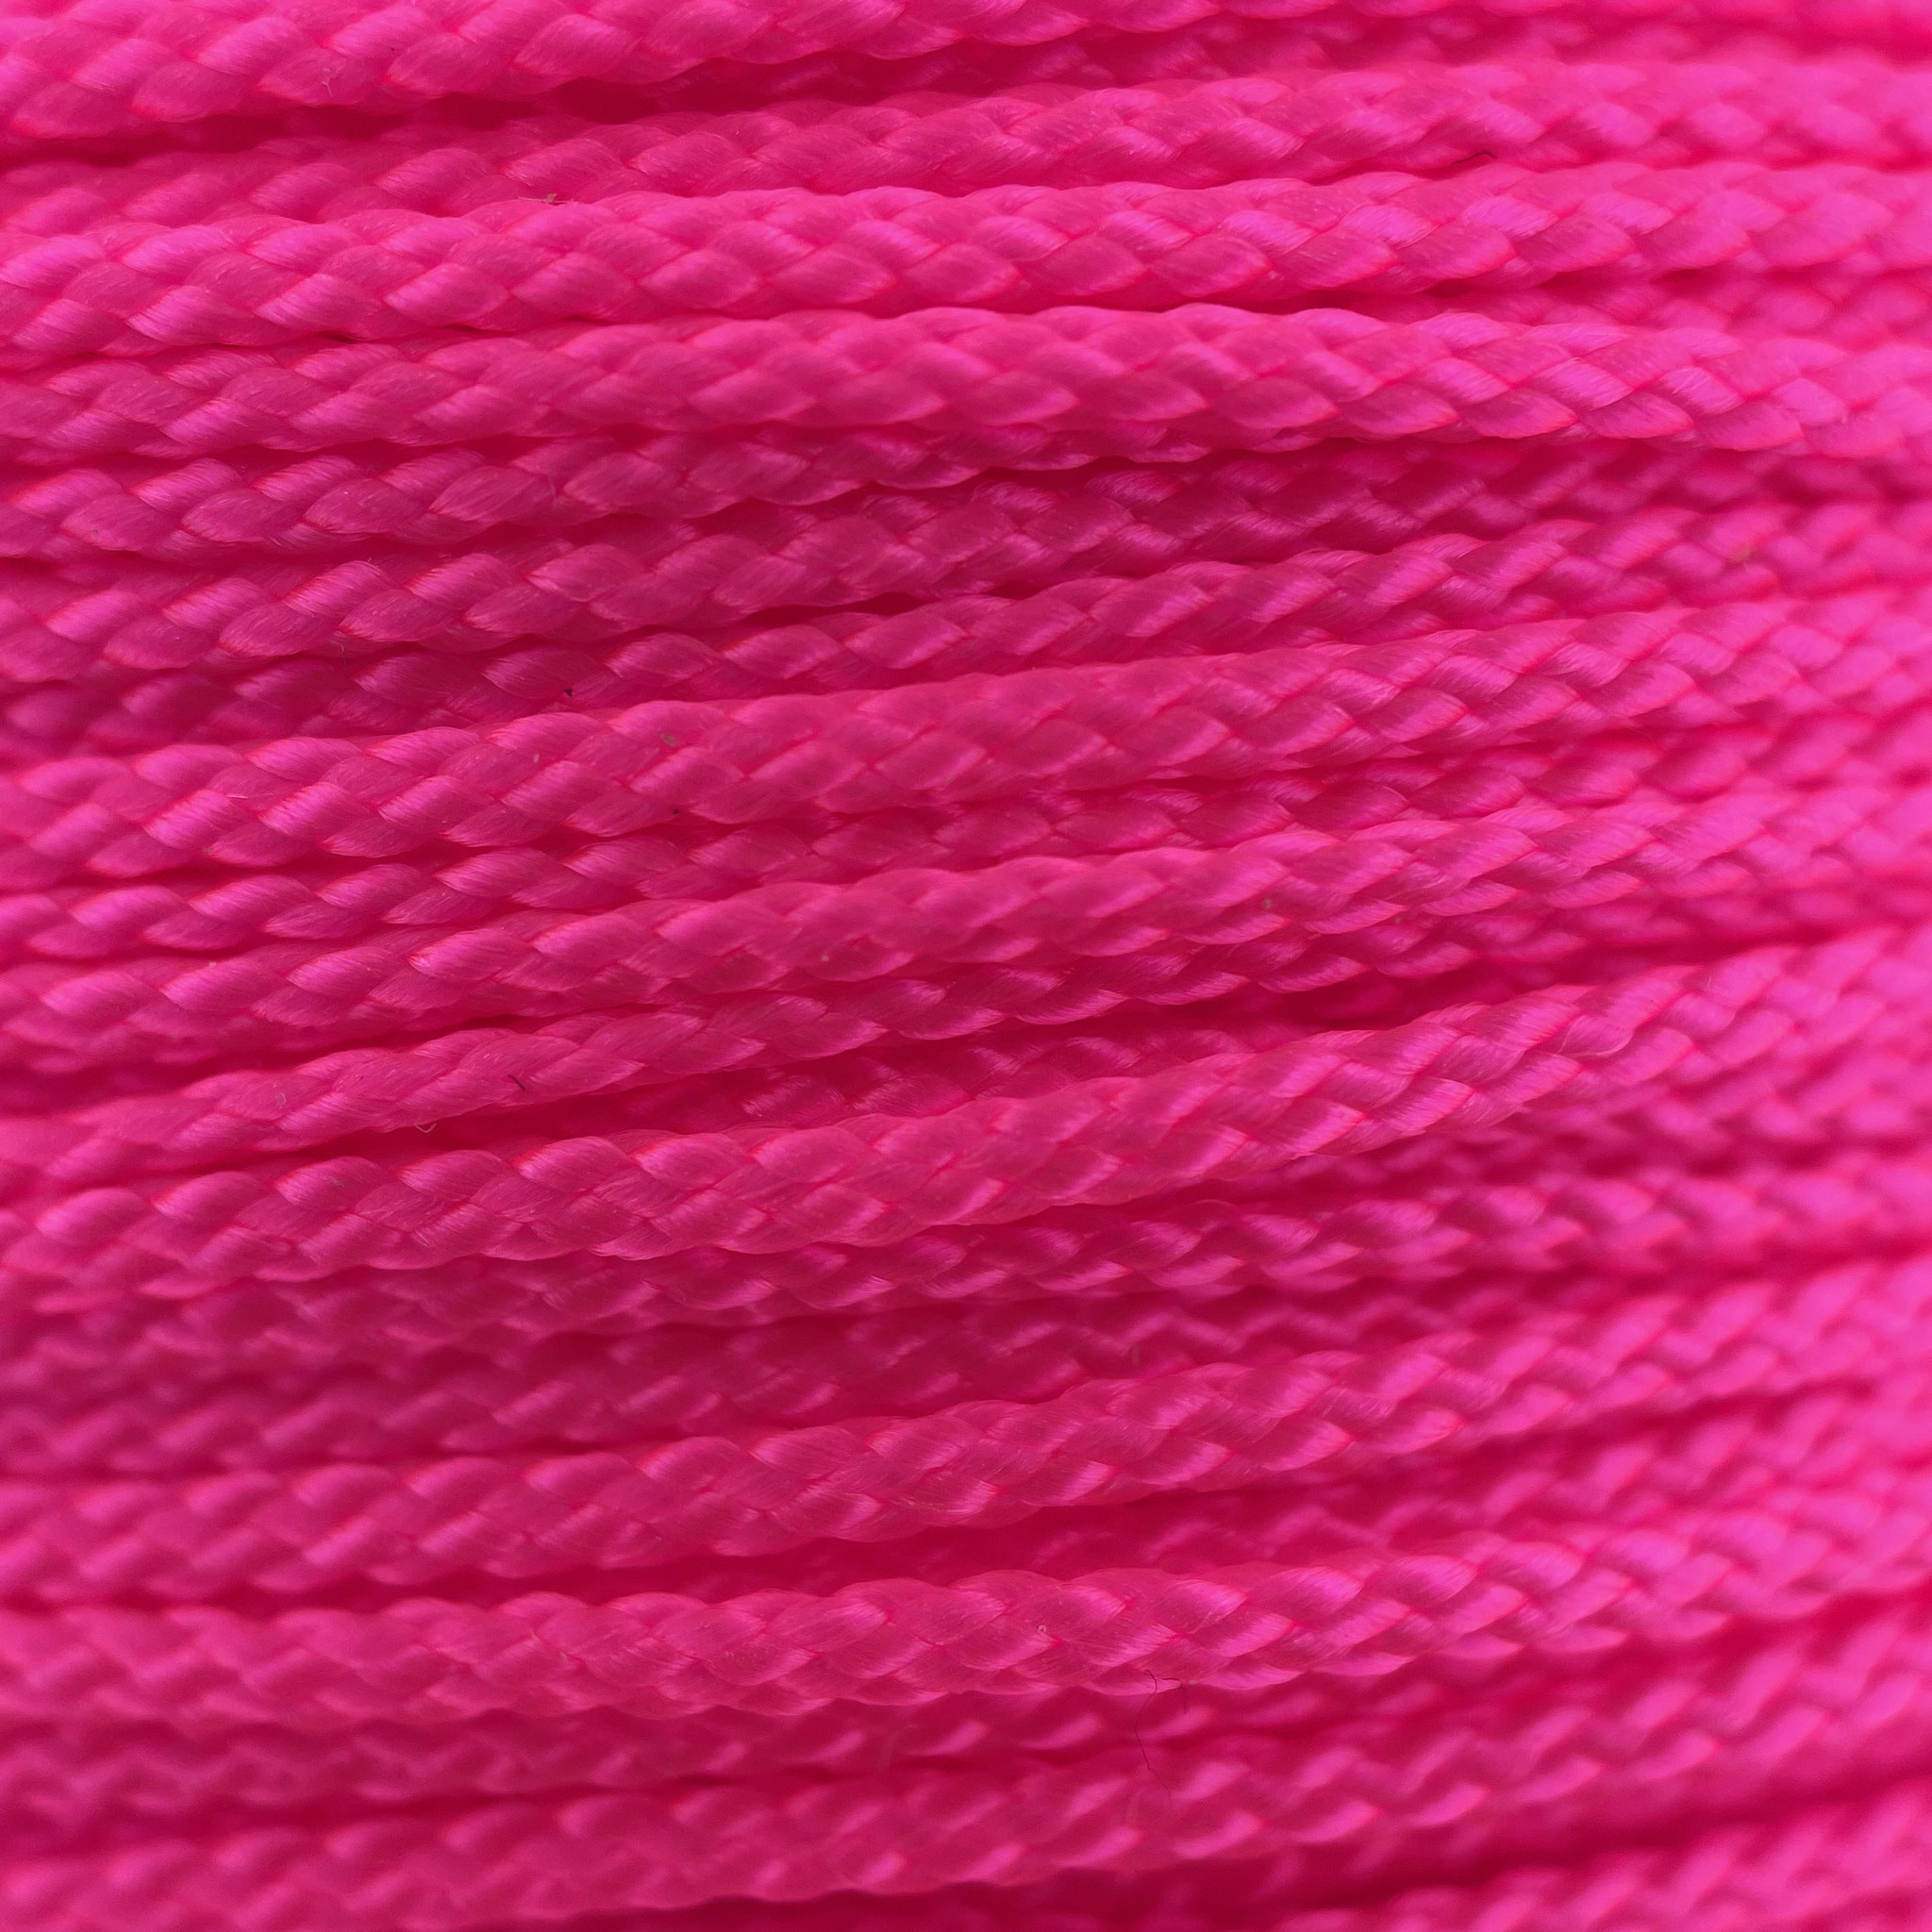 Buy Microcord 1.4MM Ultra neon Pink from the expert